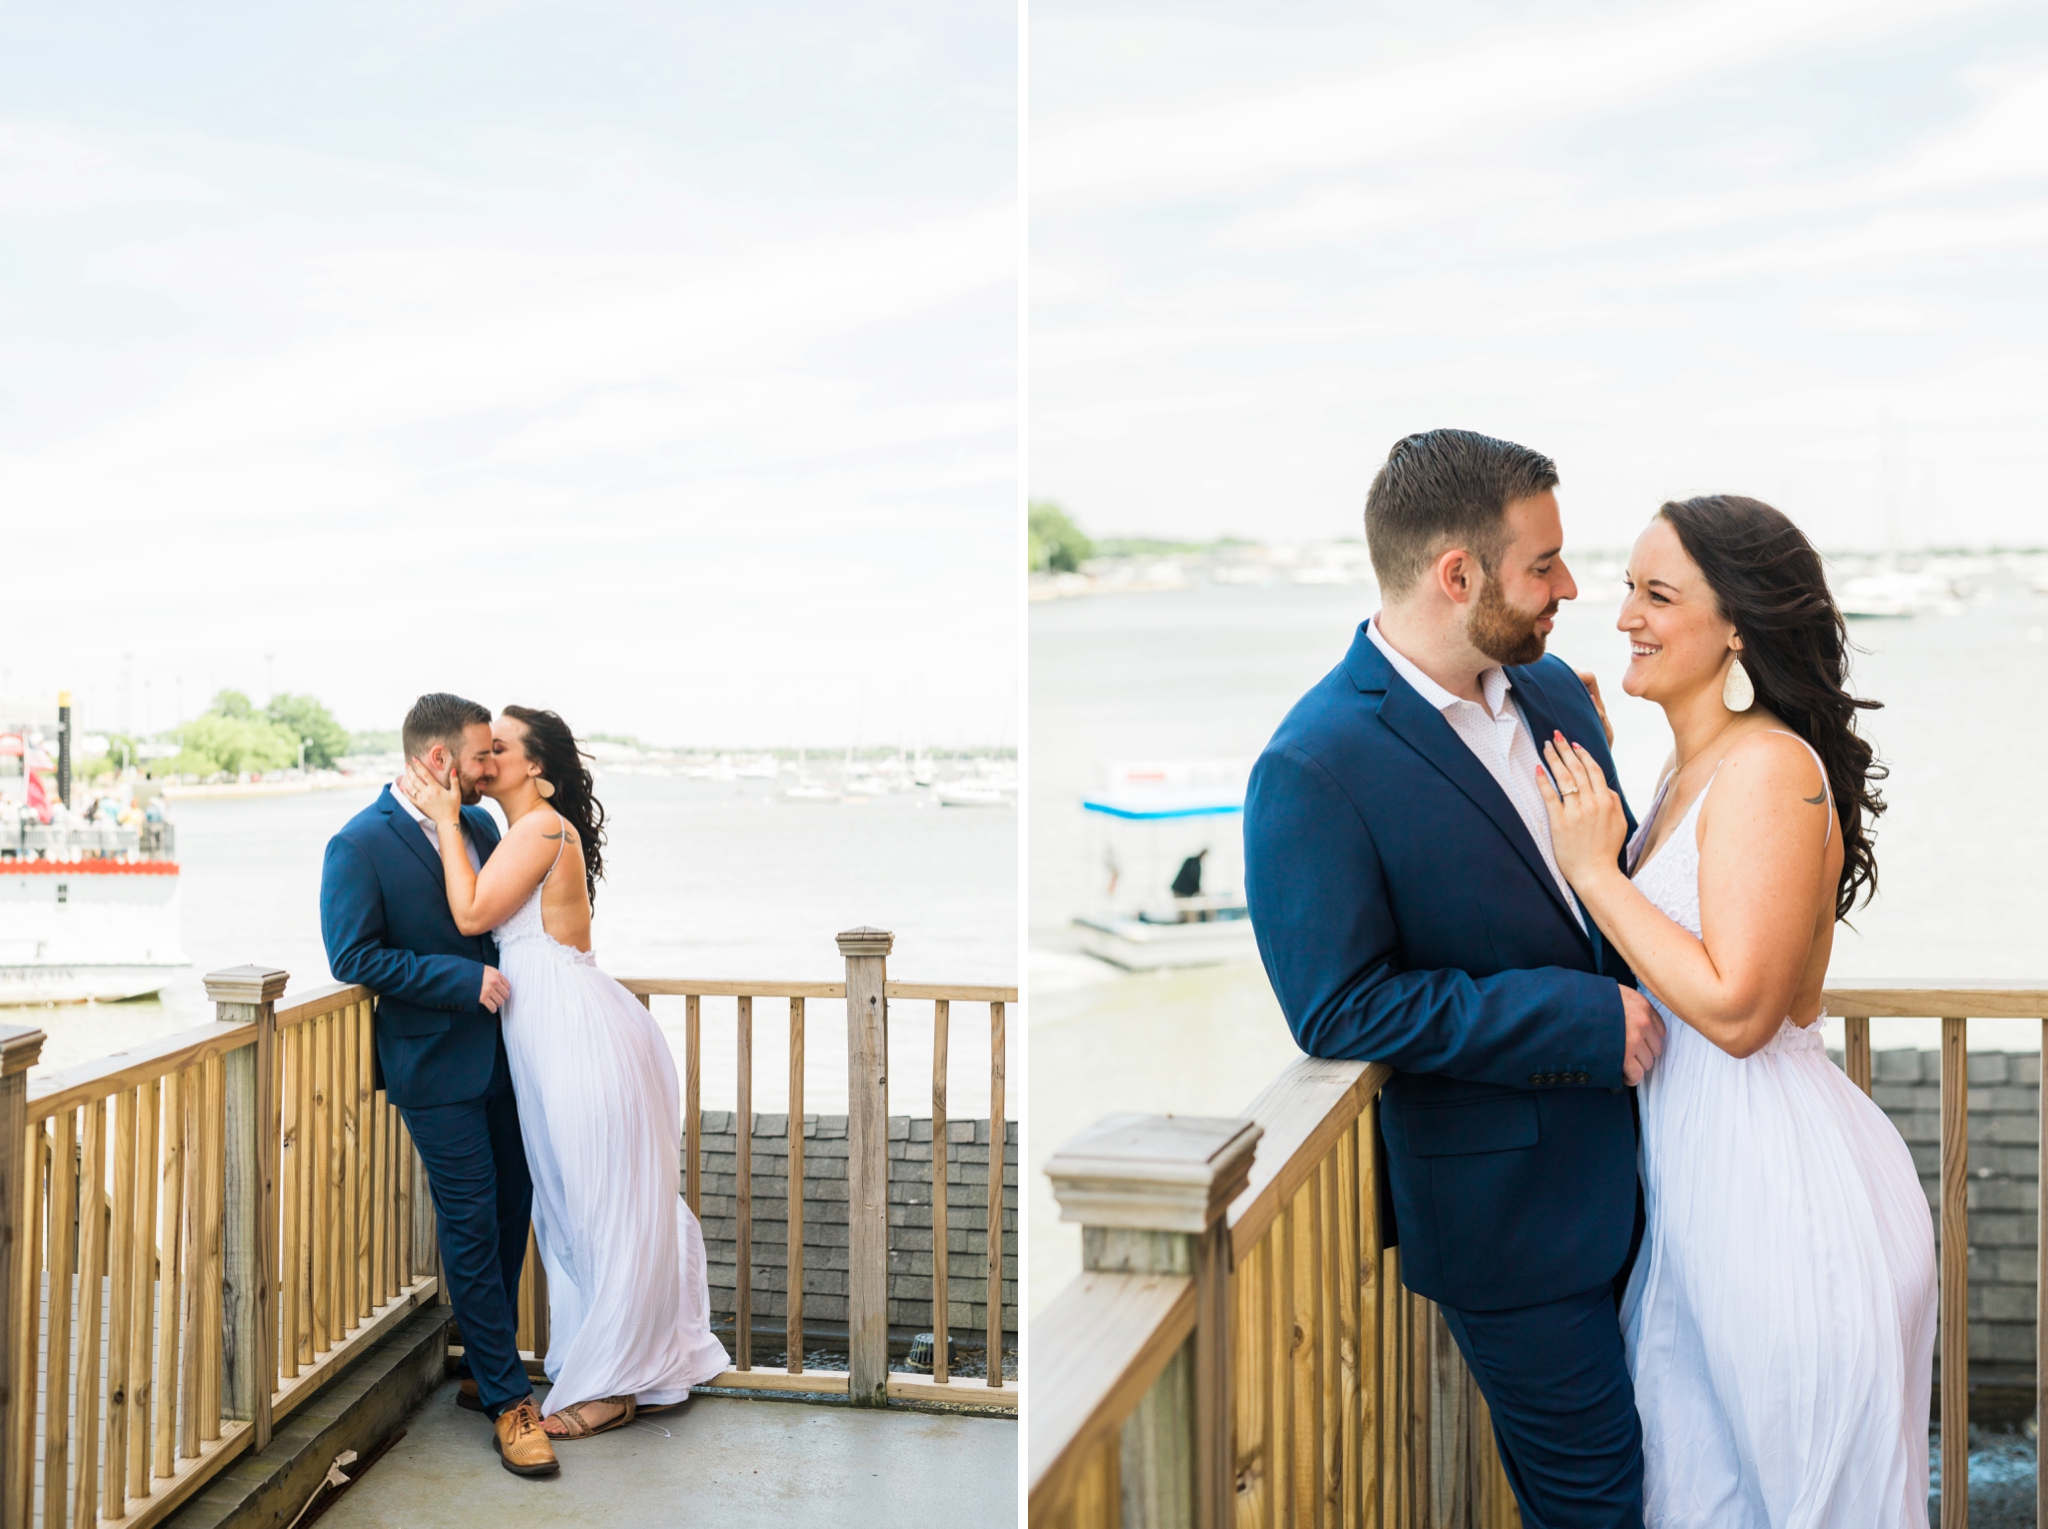 Emily Grace Photography, Lancaster PA Wedding Photographer for Non-Traditional Couples, Annapolis Engagement Session, Chesapeake Bay Engagement Photographer, DELMARVA Wedding Photographer